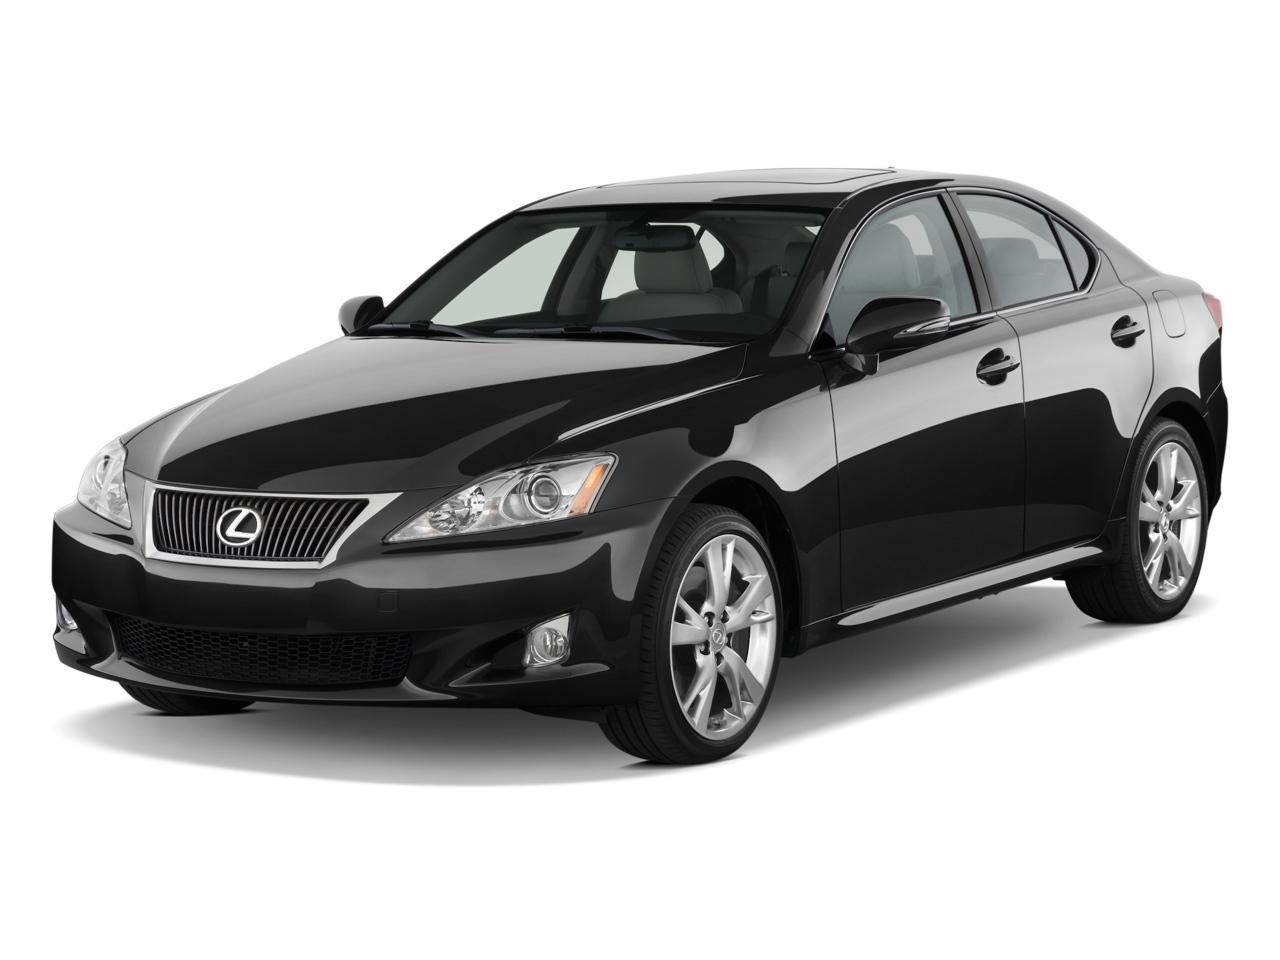 2010 Lexus Is Review Ratings Specs Prices And Photos